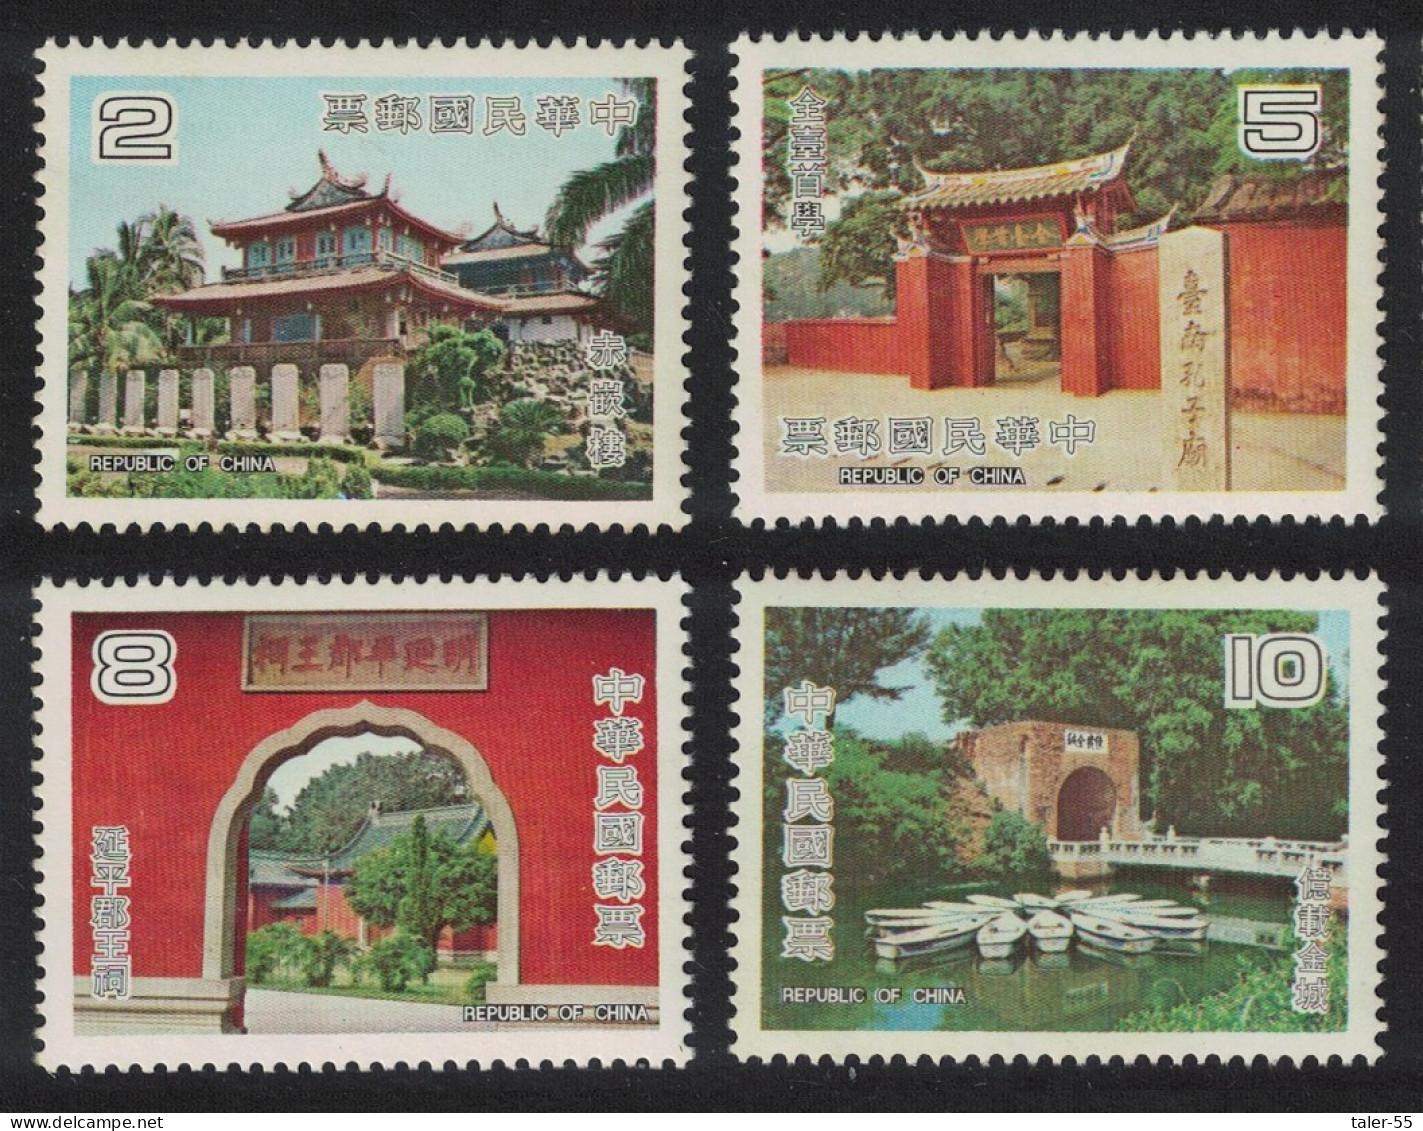 Taiwan Tourism 4v 1979 MNH SG#1240-1243 - Unused Stamps